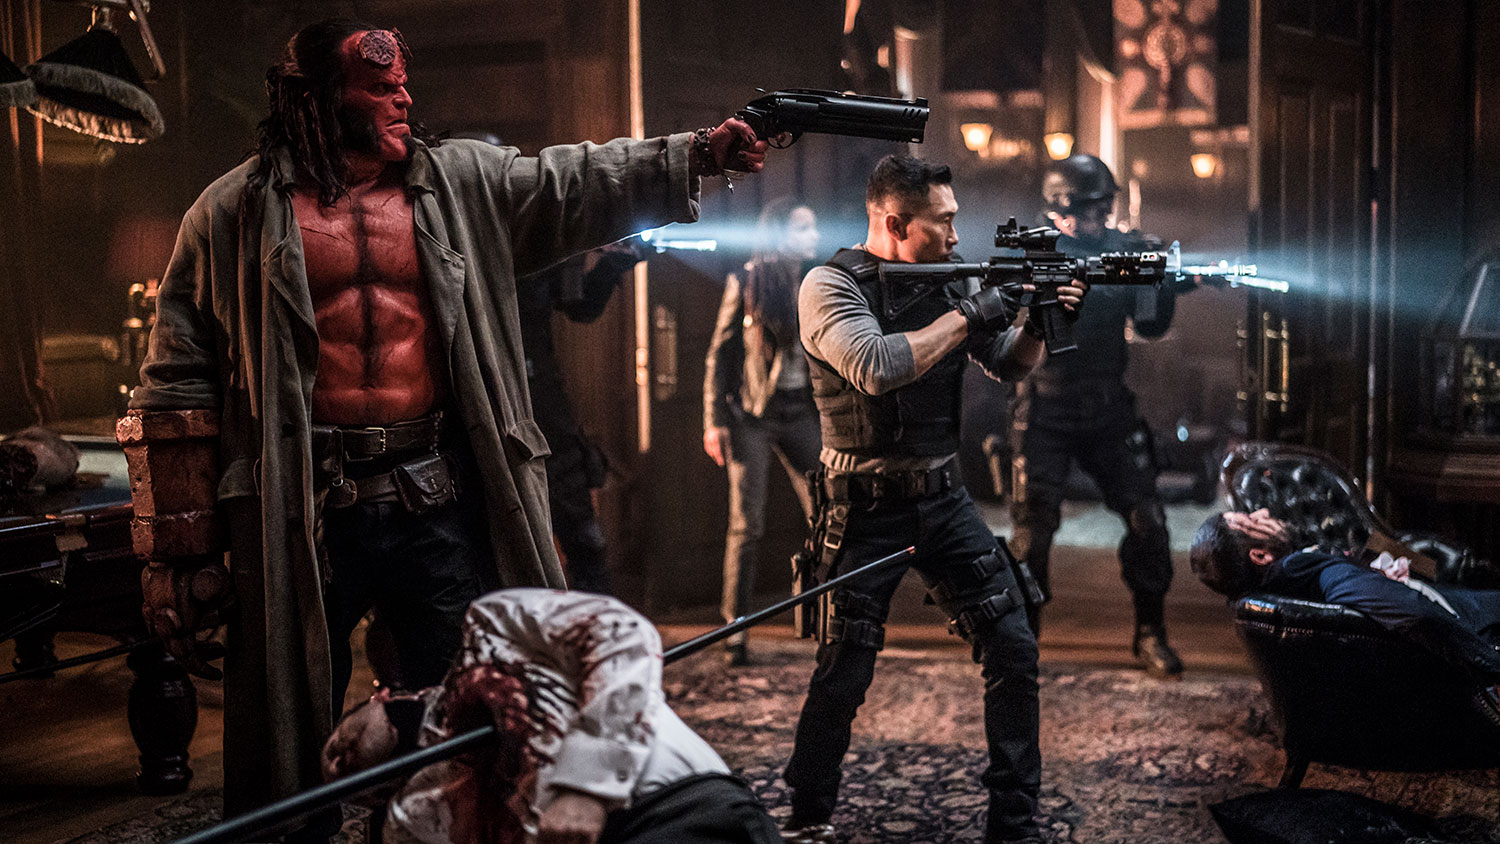 Hellboy review